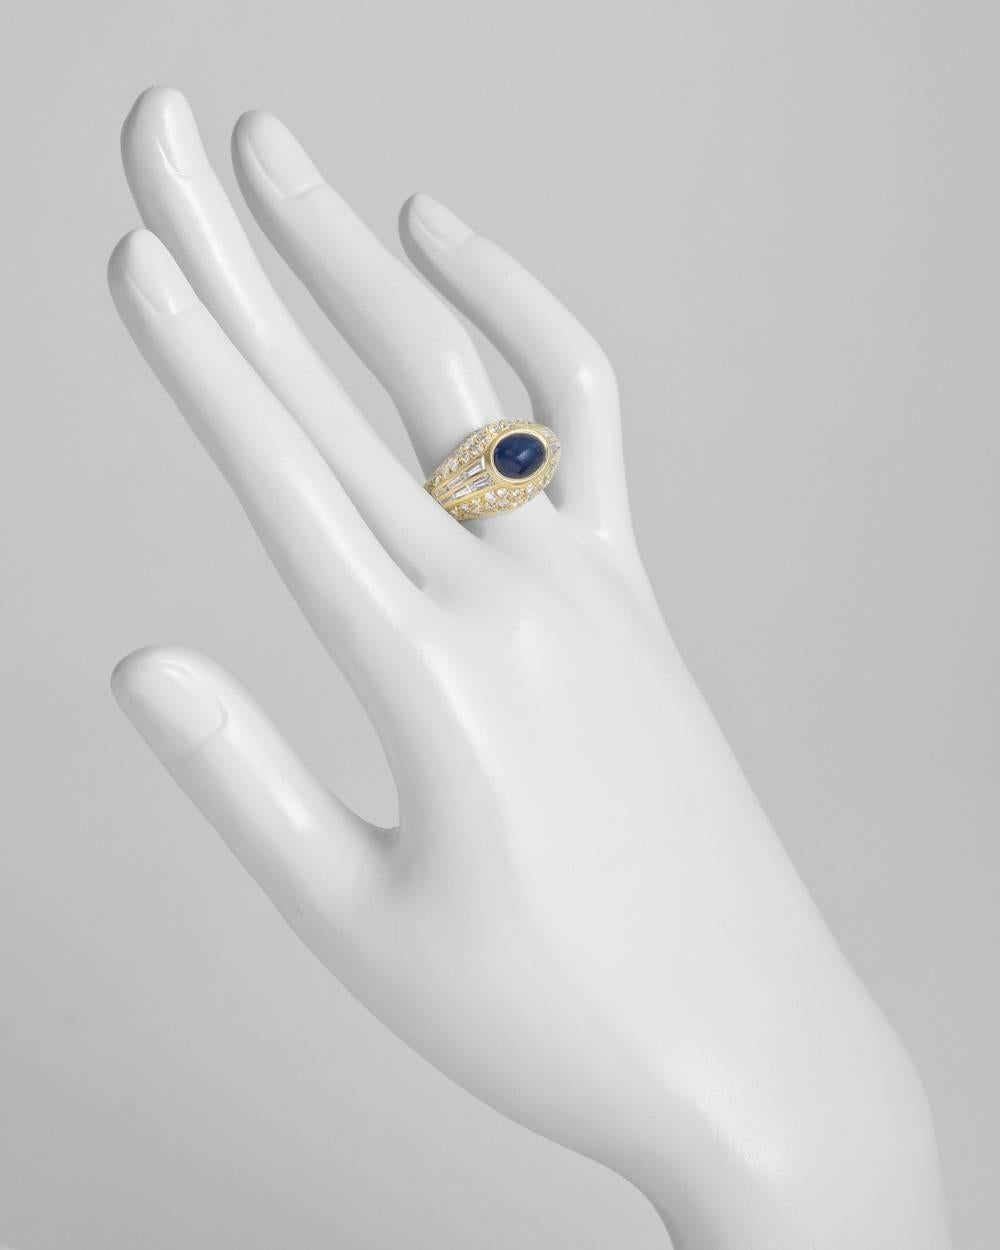 Sapphire and diamond dress ring, centering a gypsy-set natural cabochon-cut sapphire weighing approximately 3.50 carats, in a diamond-set bombé-style mounting with near-colorless round and baguette-cut diamonds weighing approximately 1.30 total